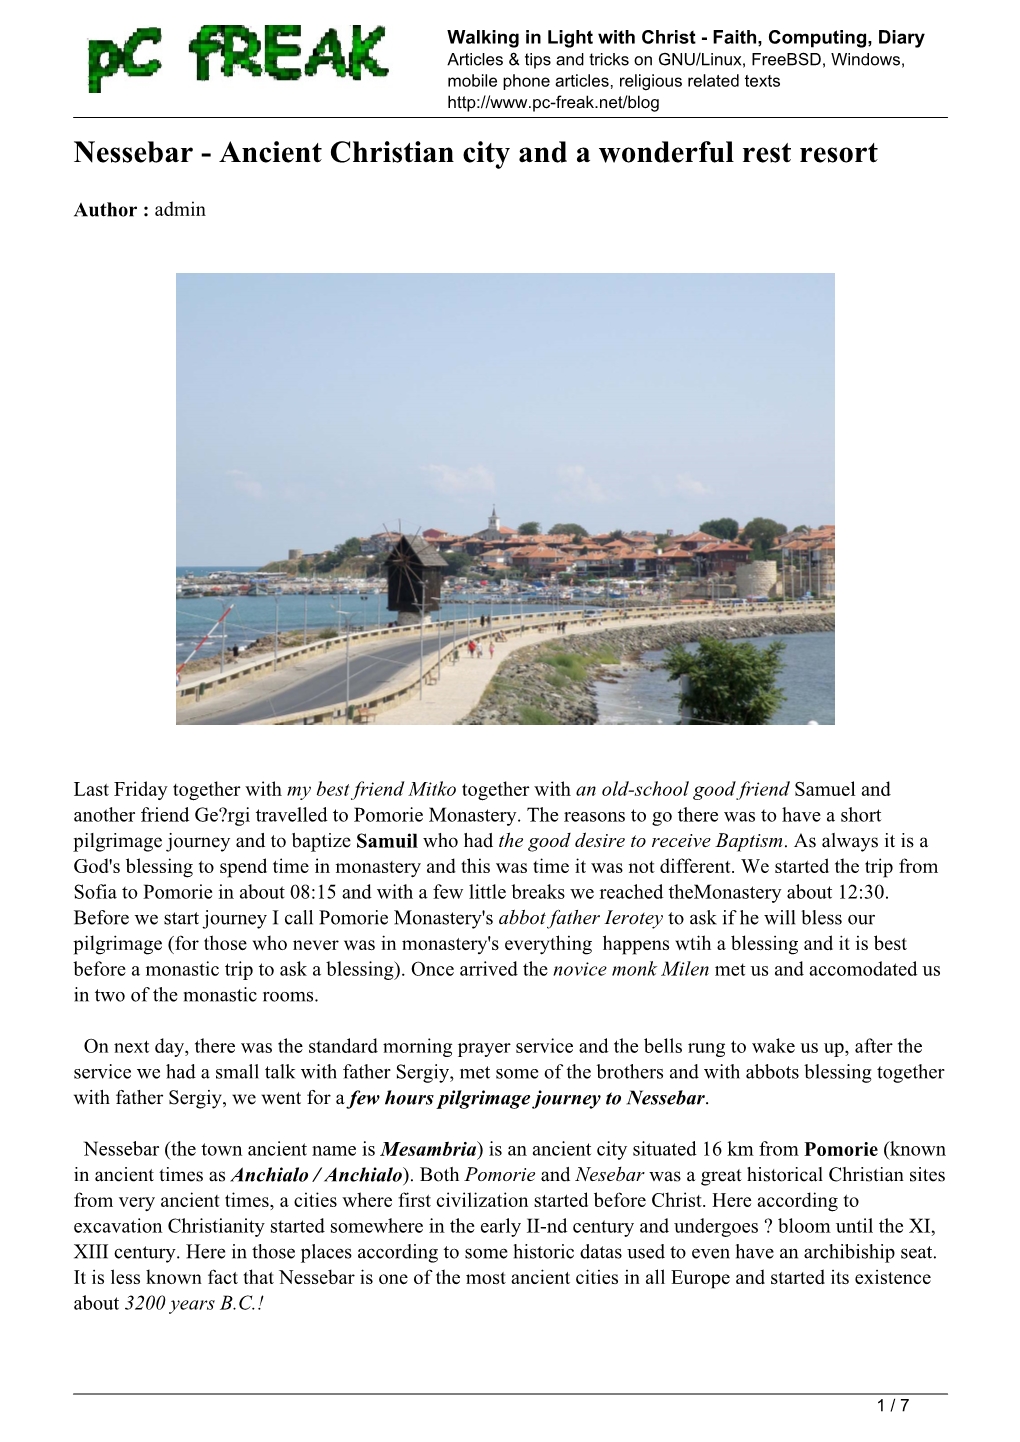 Nessebar - Ancient Christian City and a Wonderful Rest Resort